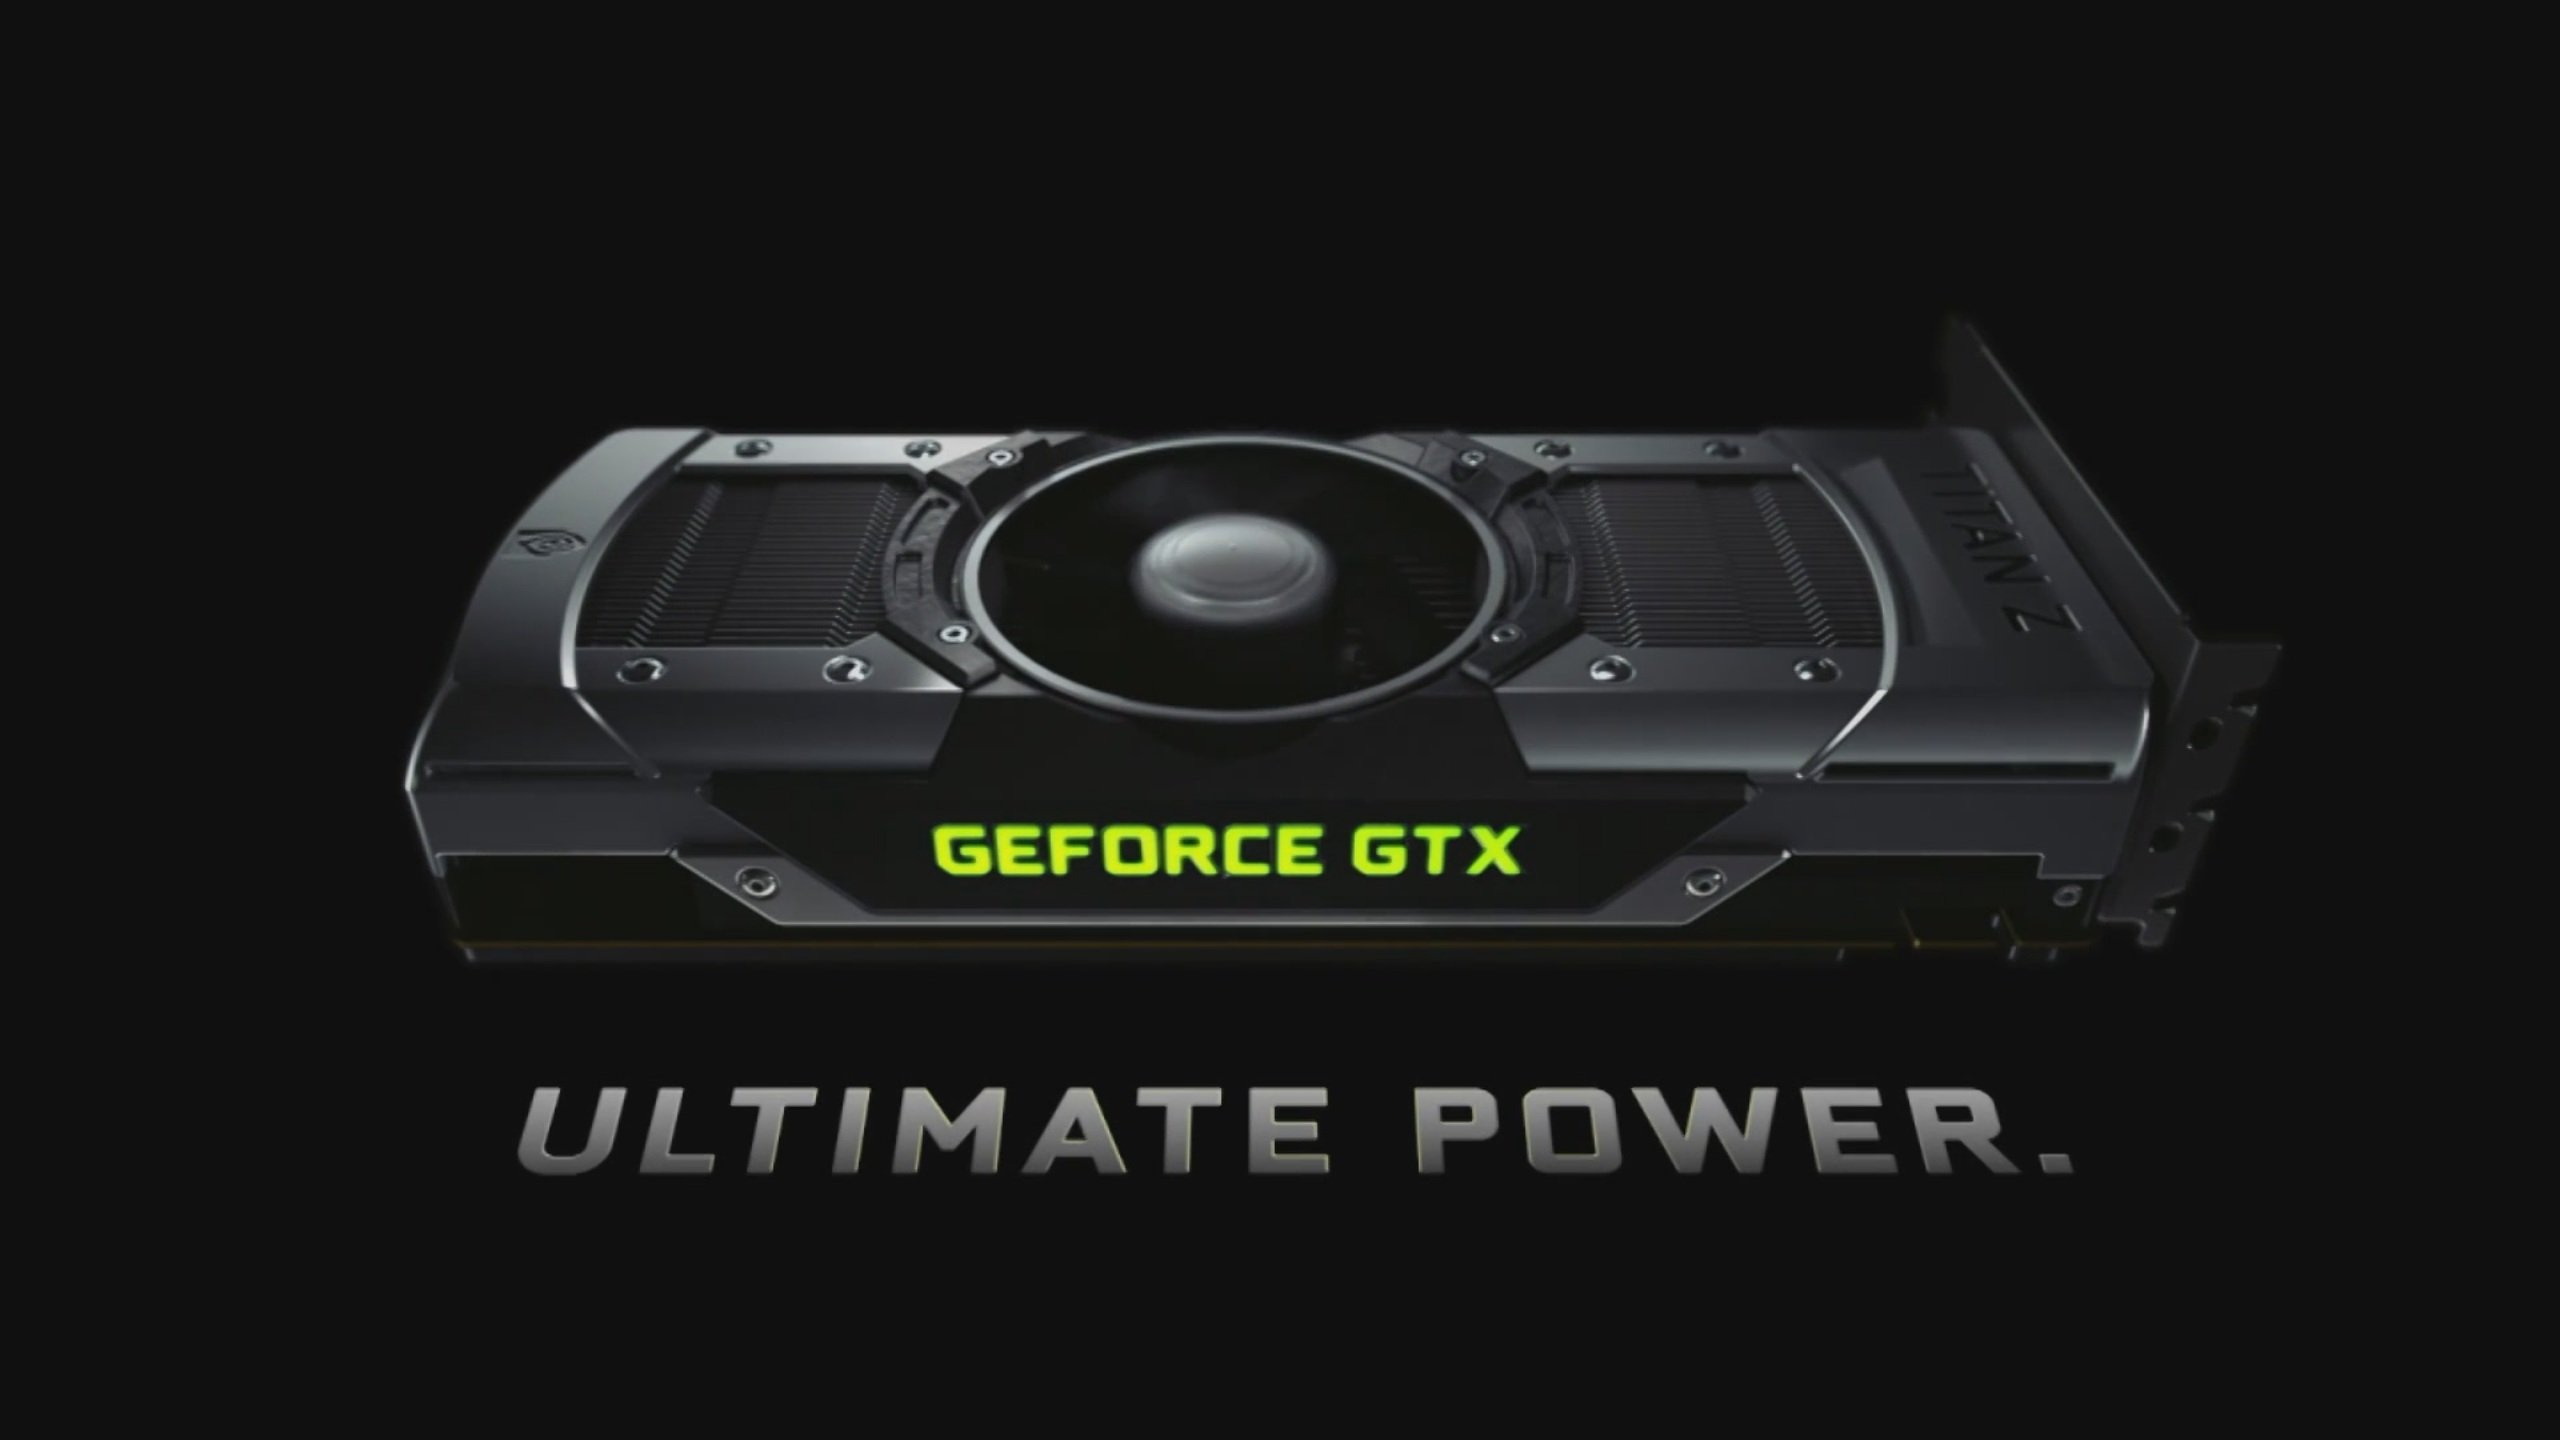 Free Download Nvidia Geforce Gtx Gaming Computer Wallpaper 2560x1440 2560x1440 For Your Desktop Mobile Tablet Explore 49 Nvidia Geforce Wallpaper 5760 X 1080 Wallpapers Hd Nvidia Wallpaper 19x1080 Hd Blue Nvidia Wallpaper 19x1080